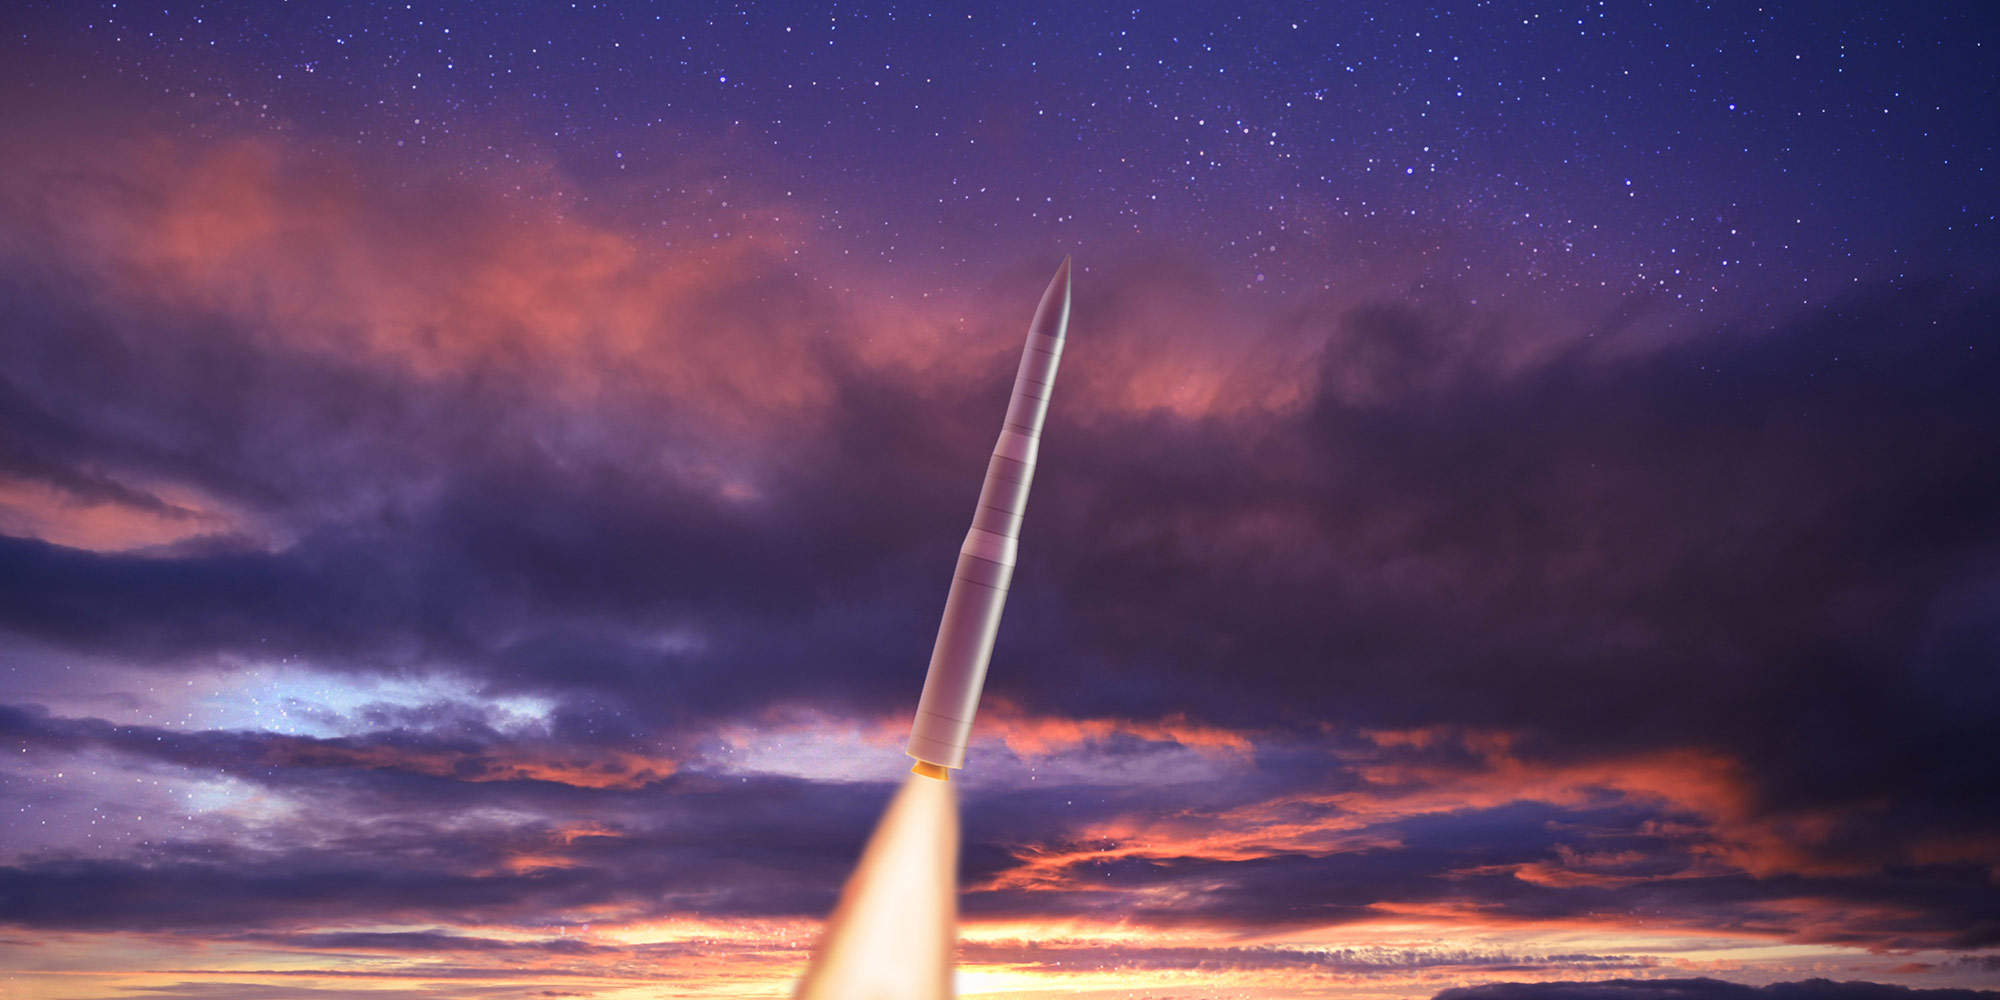 Missile launch in colorful sunset